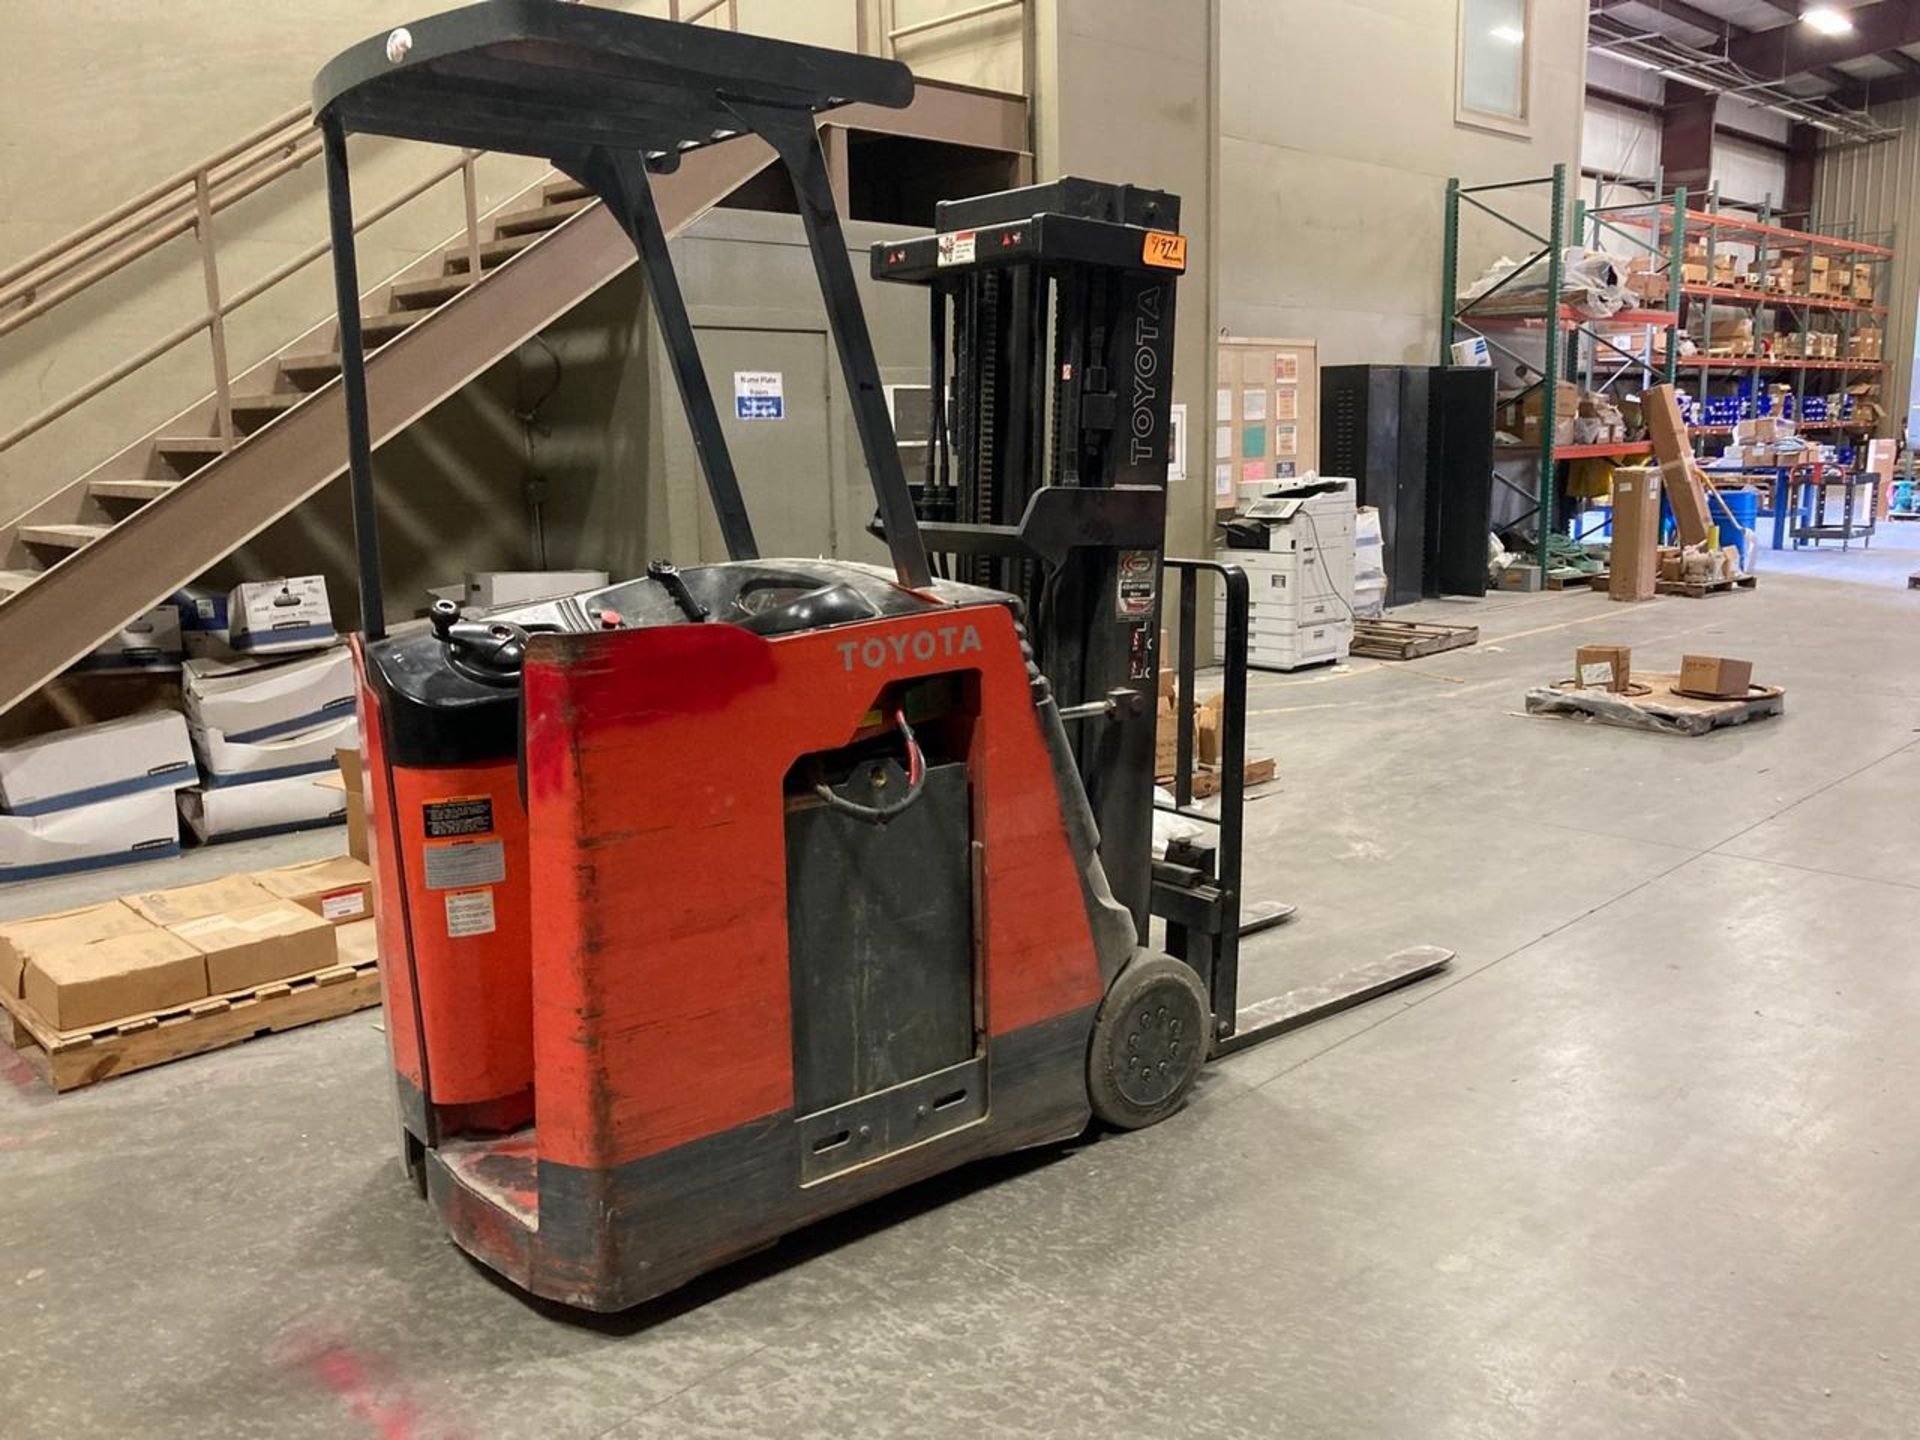 Toyota 7BNCU15 3,000-Lb Capacity Electric Forklift - Image 2 of 6